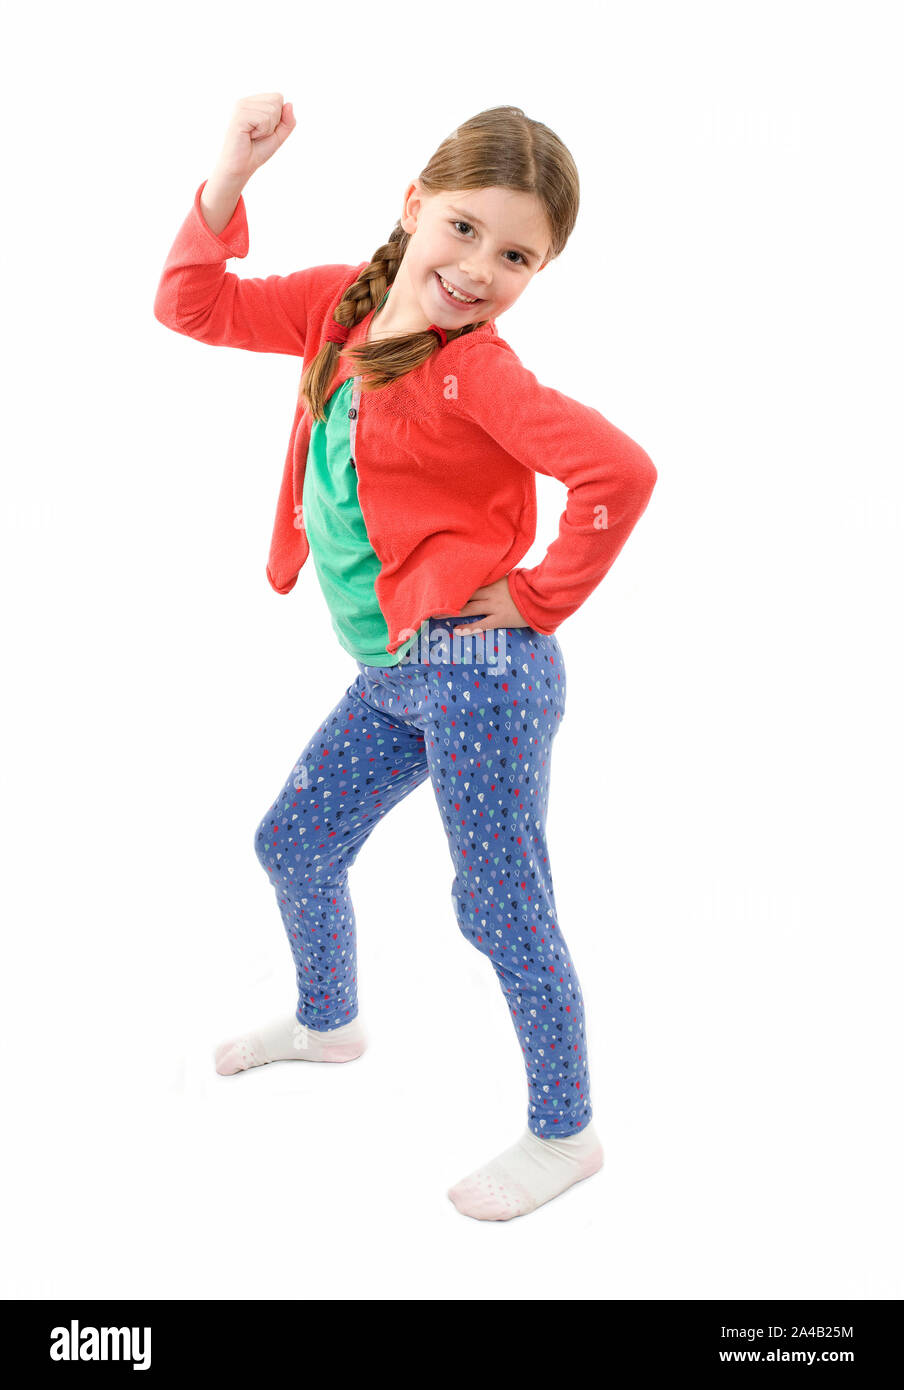 Young girl posing for camera on isolated white background Stock Photo